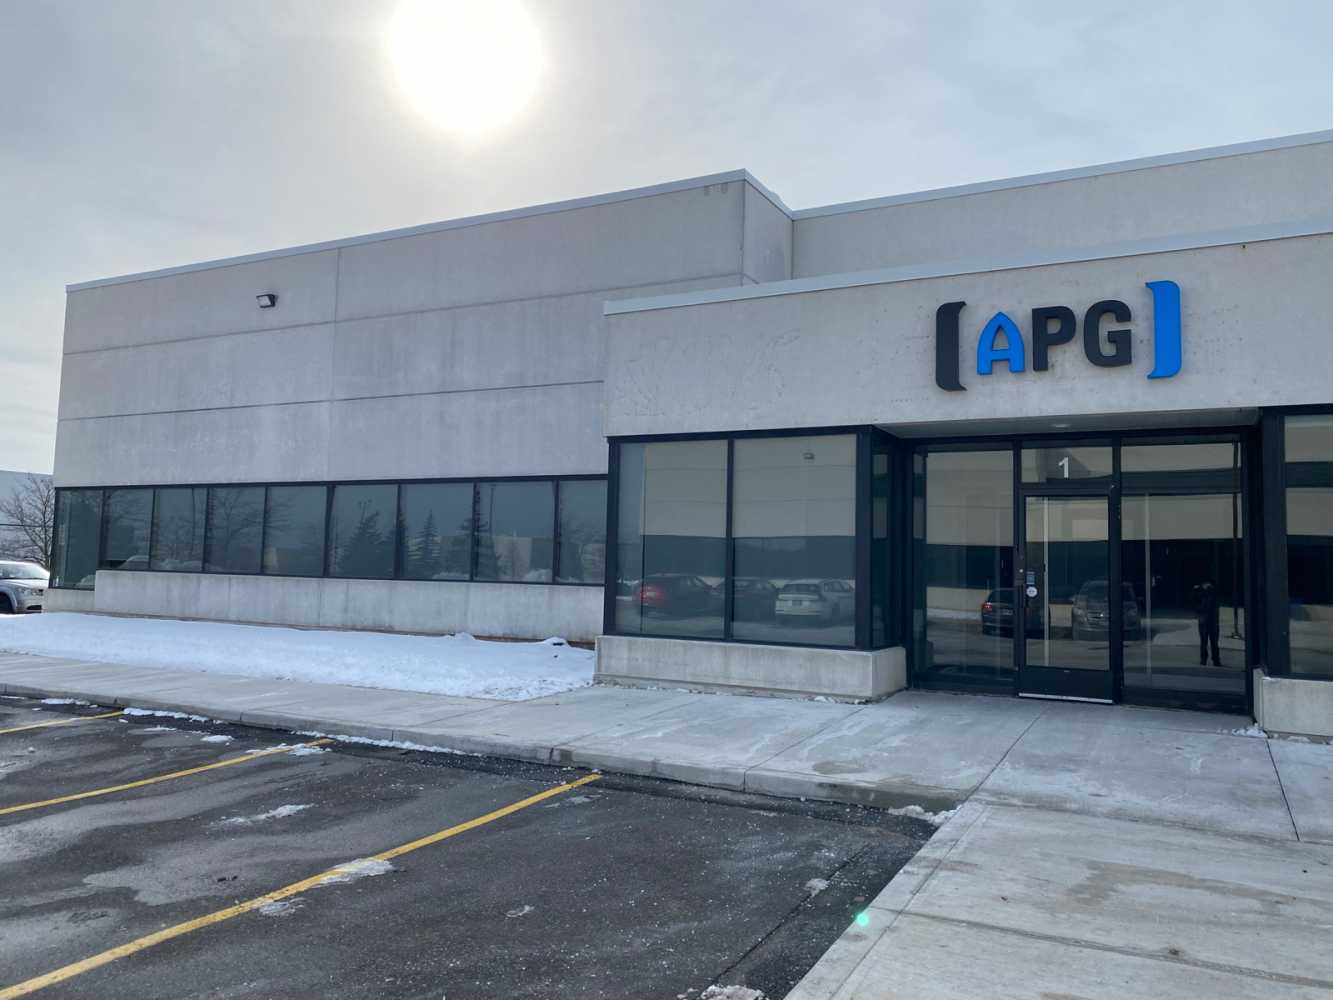 APG’s new Canadian headquarters